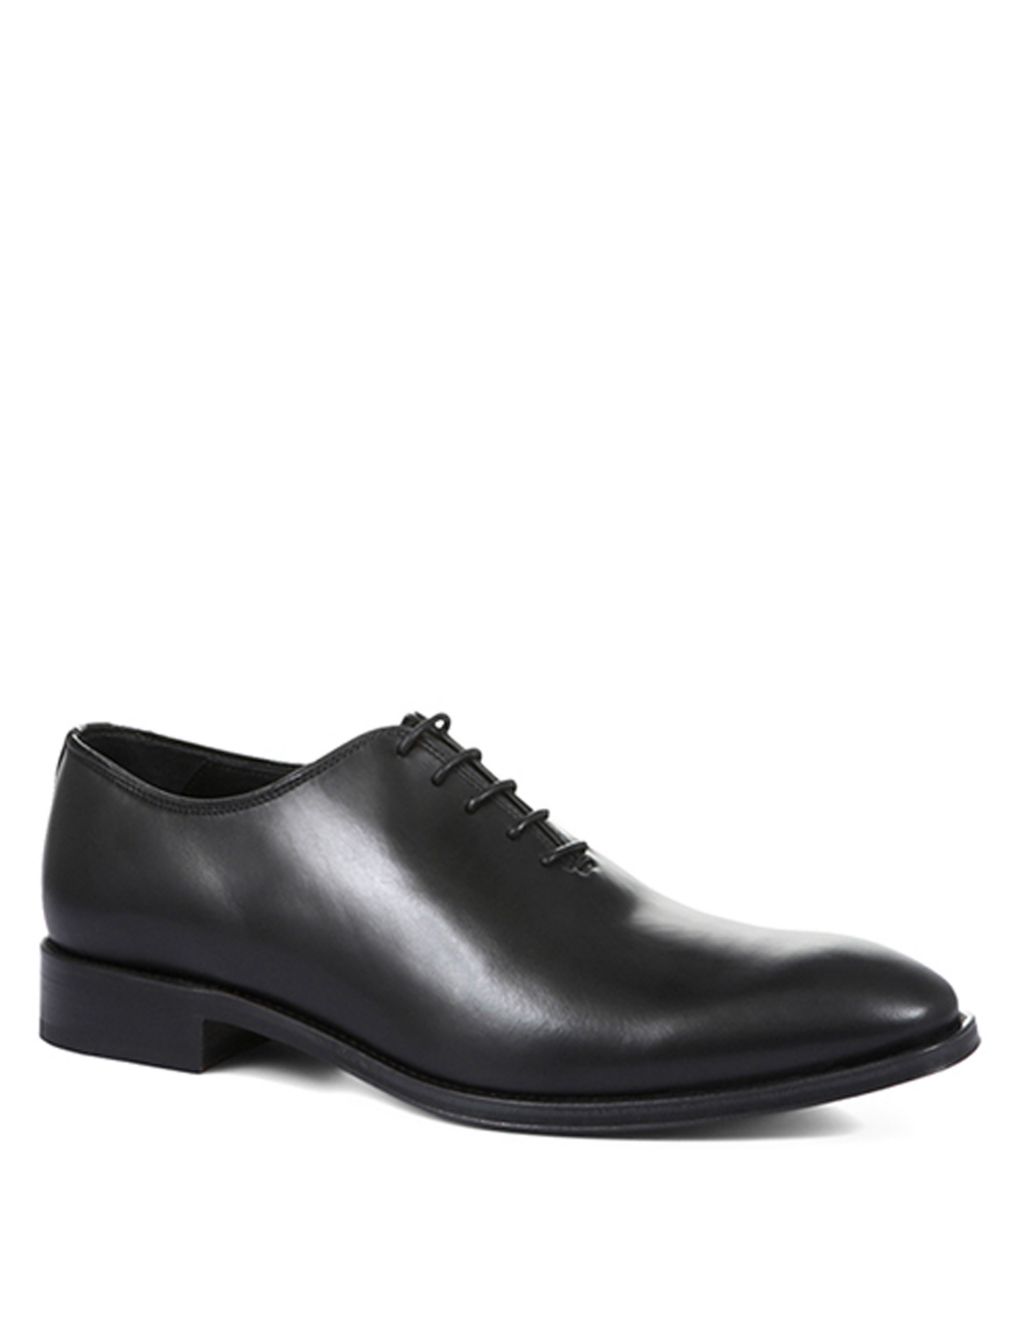 Leather Derby Shoes image 3